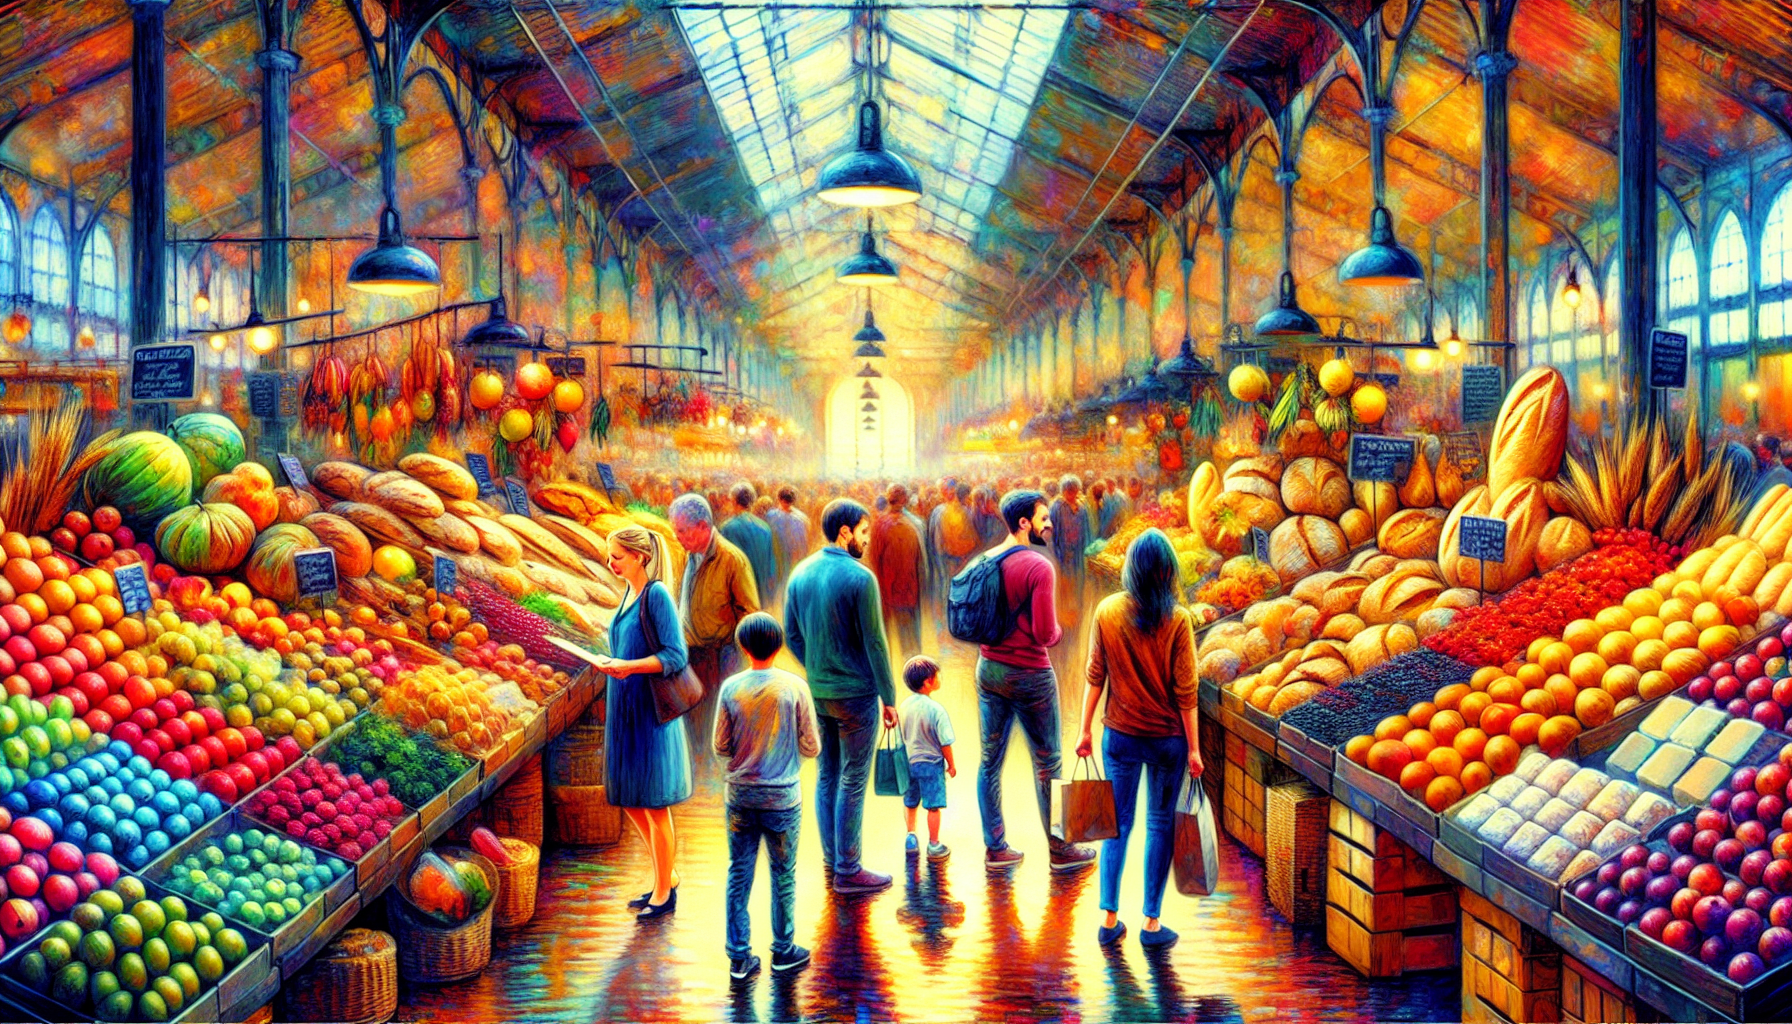 Artistic depiction of a unique shopping experience at Central Market